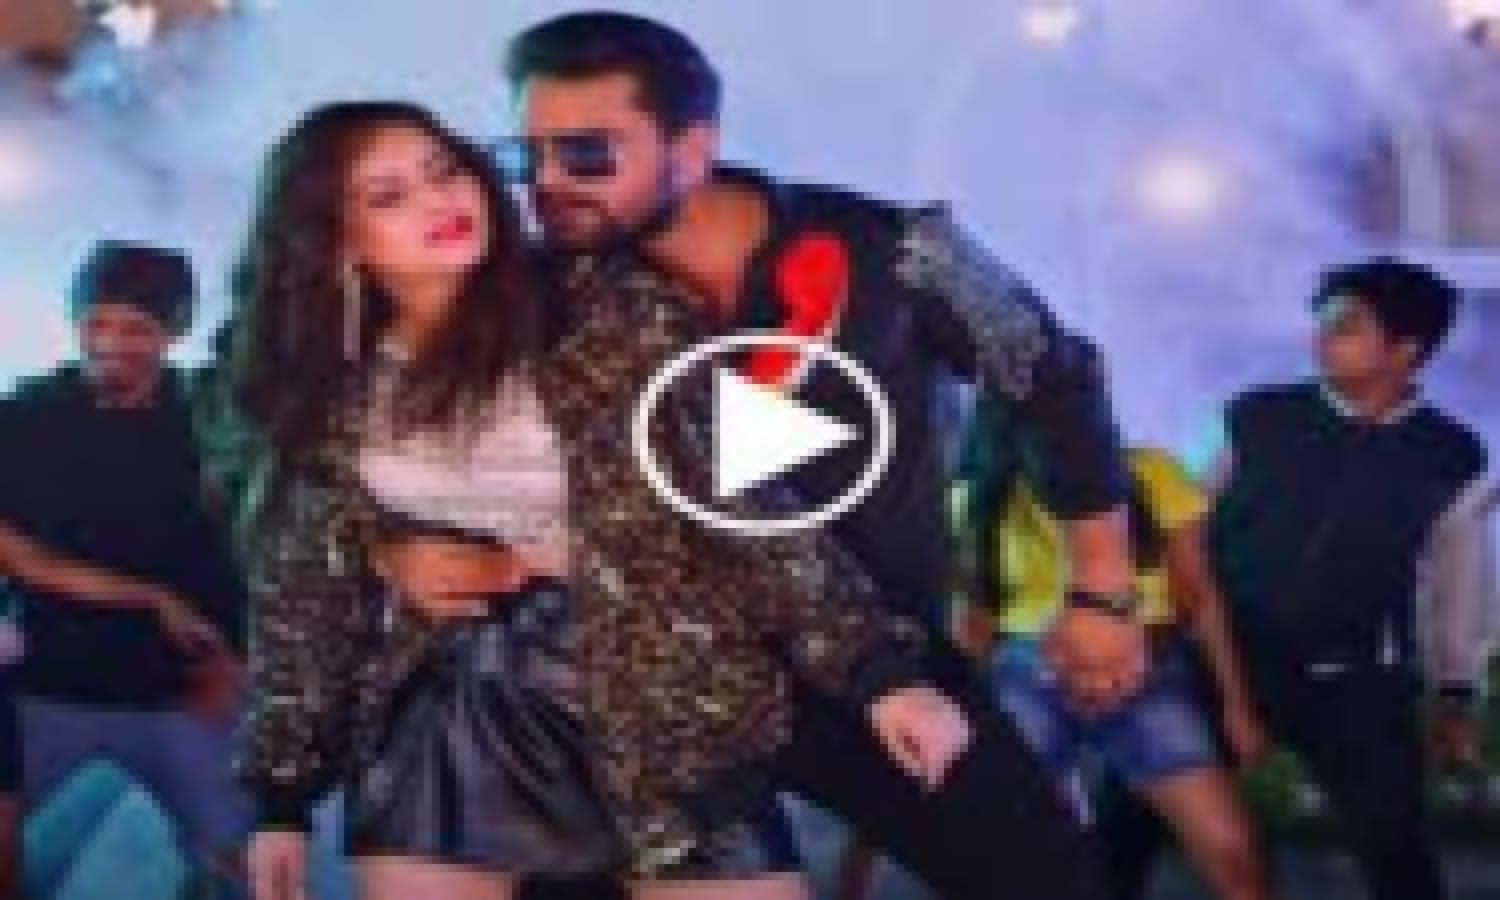 Bhojpuri Video Song: Khesari Lal romances with Ayushi Tiwari in a stylish look, says "What will happen to you?"